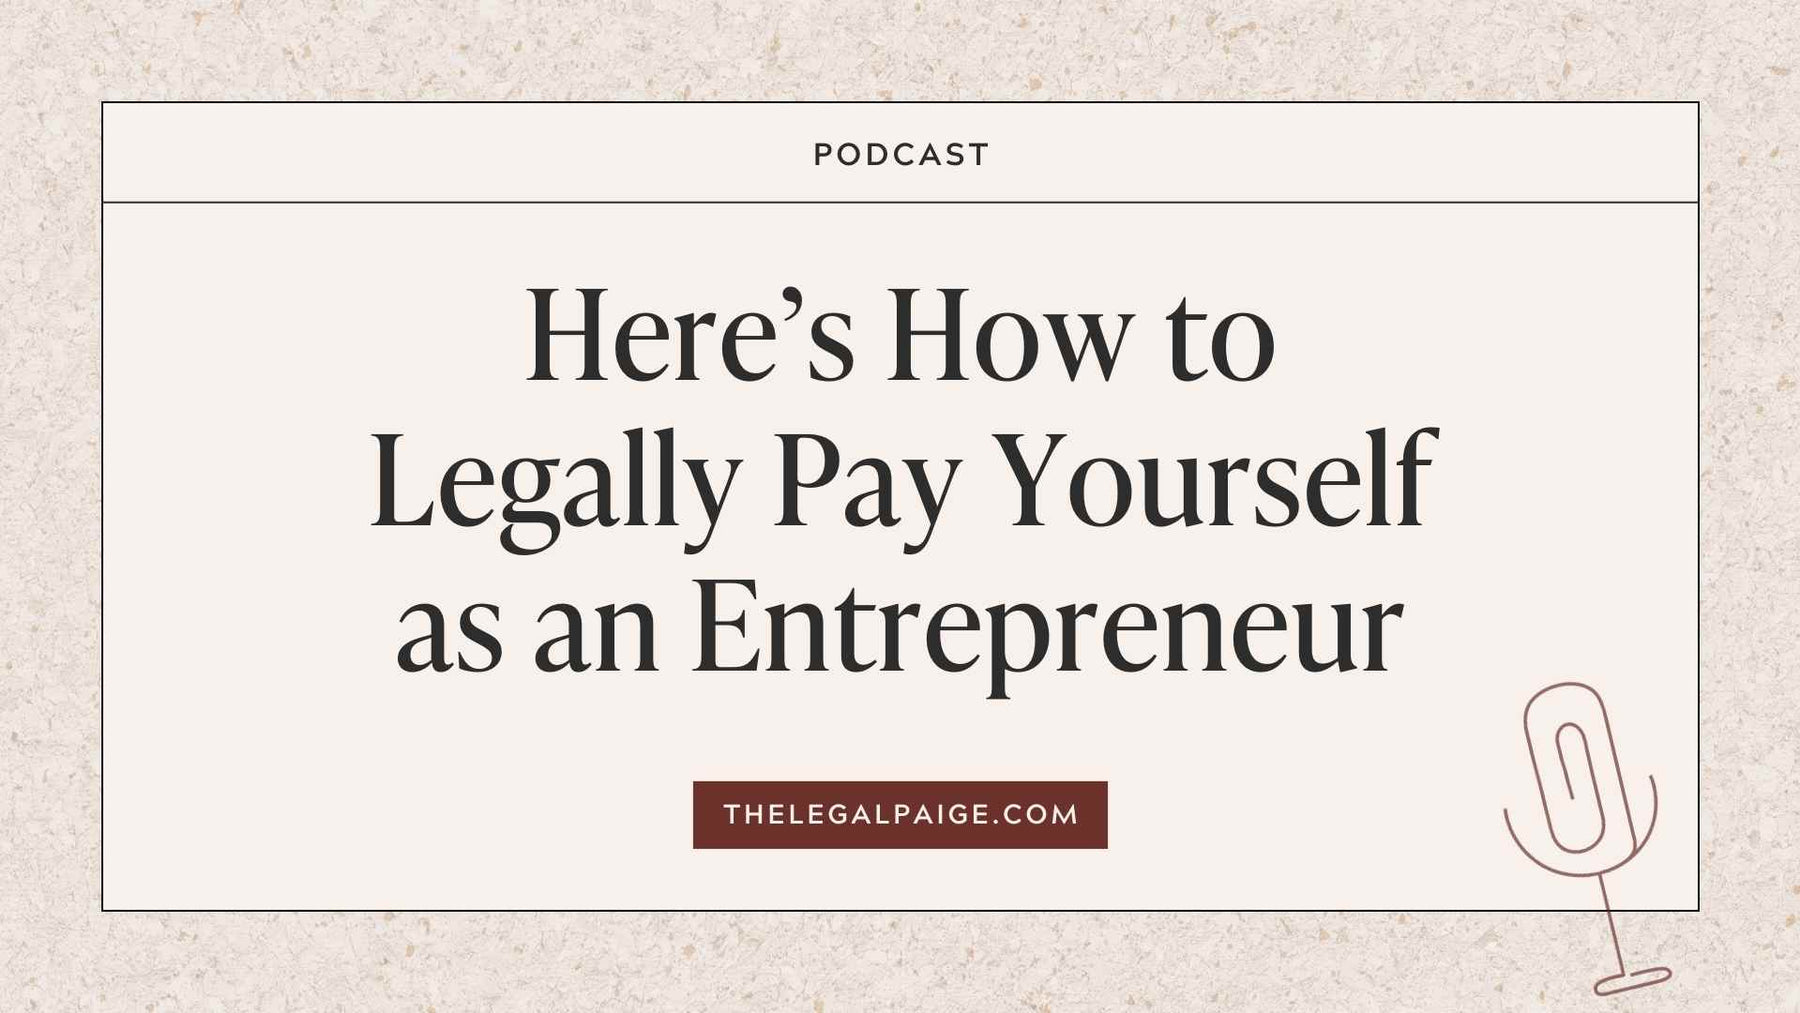 Here's How To LEGALLY Pay Yourself As an Entrepreneur